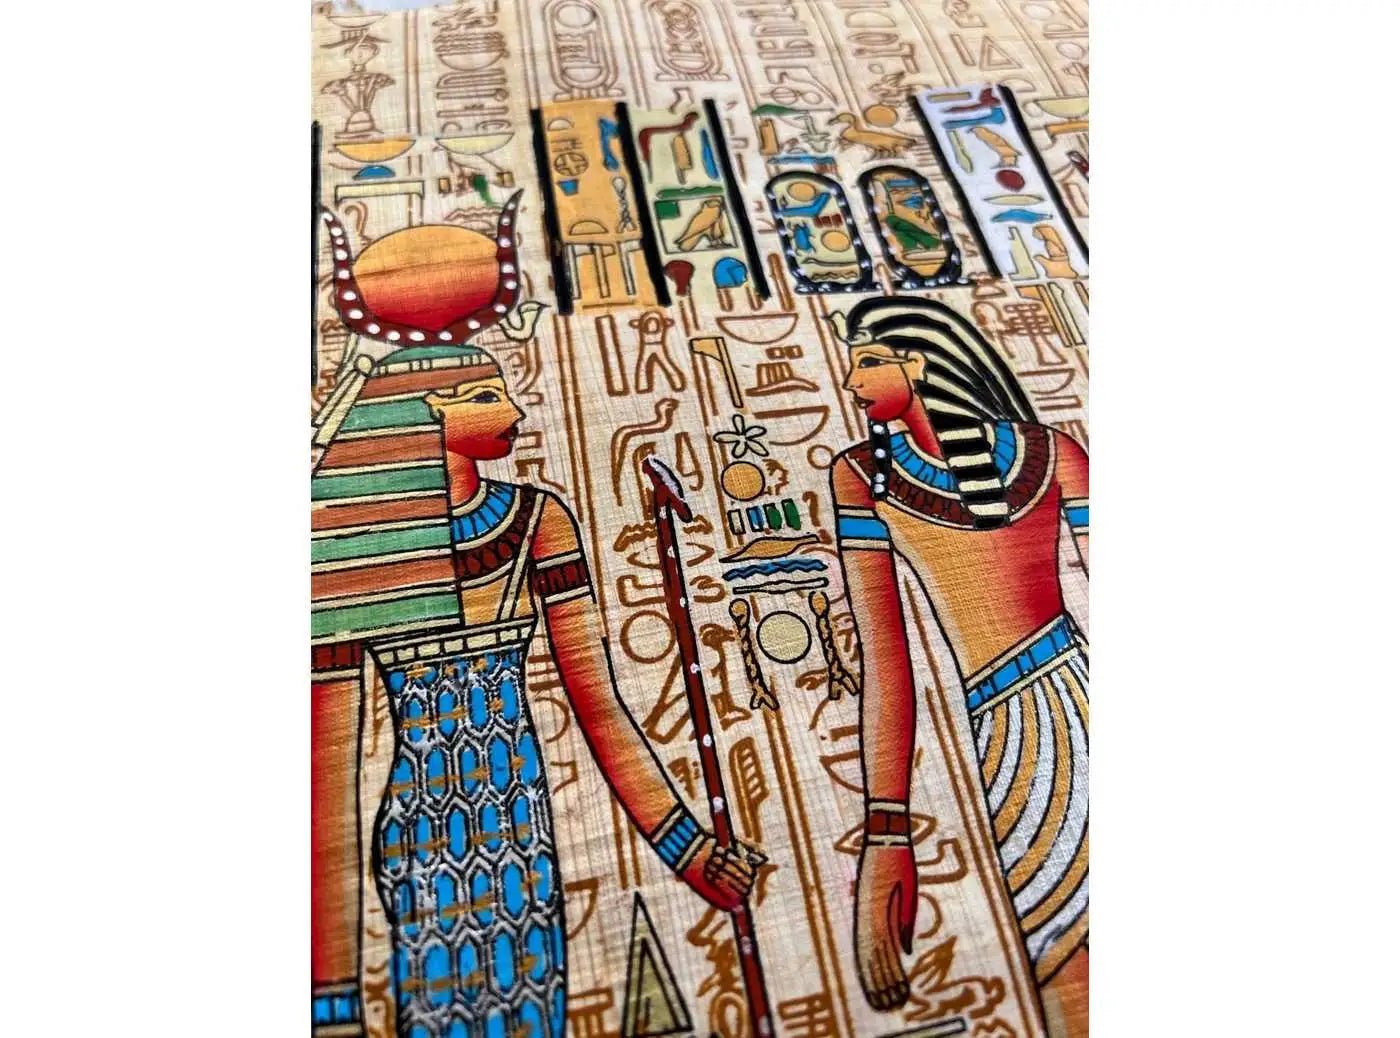 Tutankhamun Offering to Horus - King Tut Before Hathor - Hieroglyphs Papyrus - Ancient Egyptian Wall Art - Gift For Kemetic - 17x13 Inches